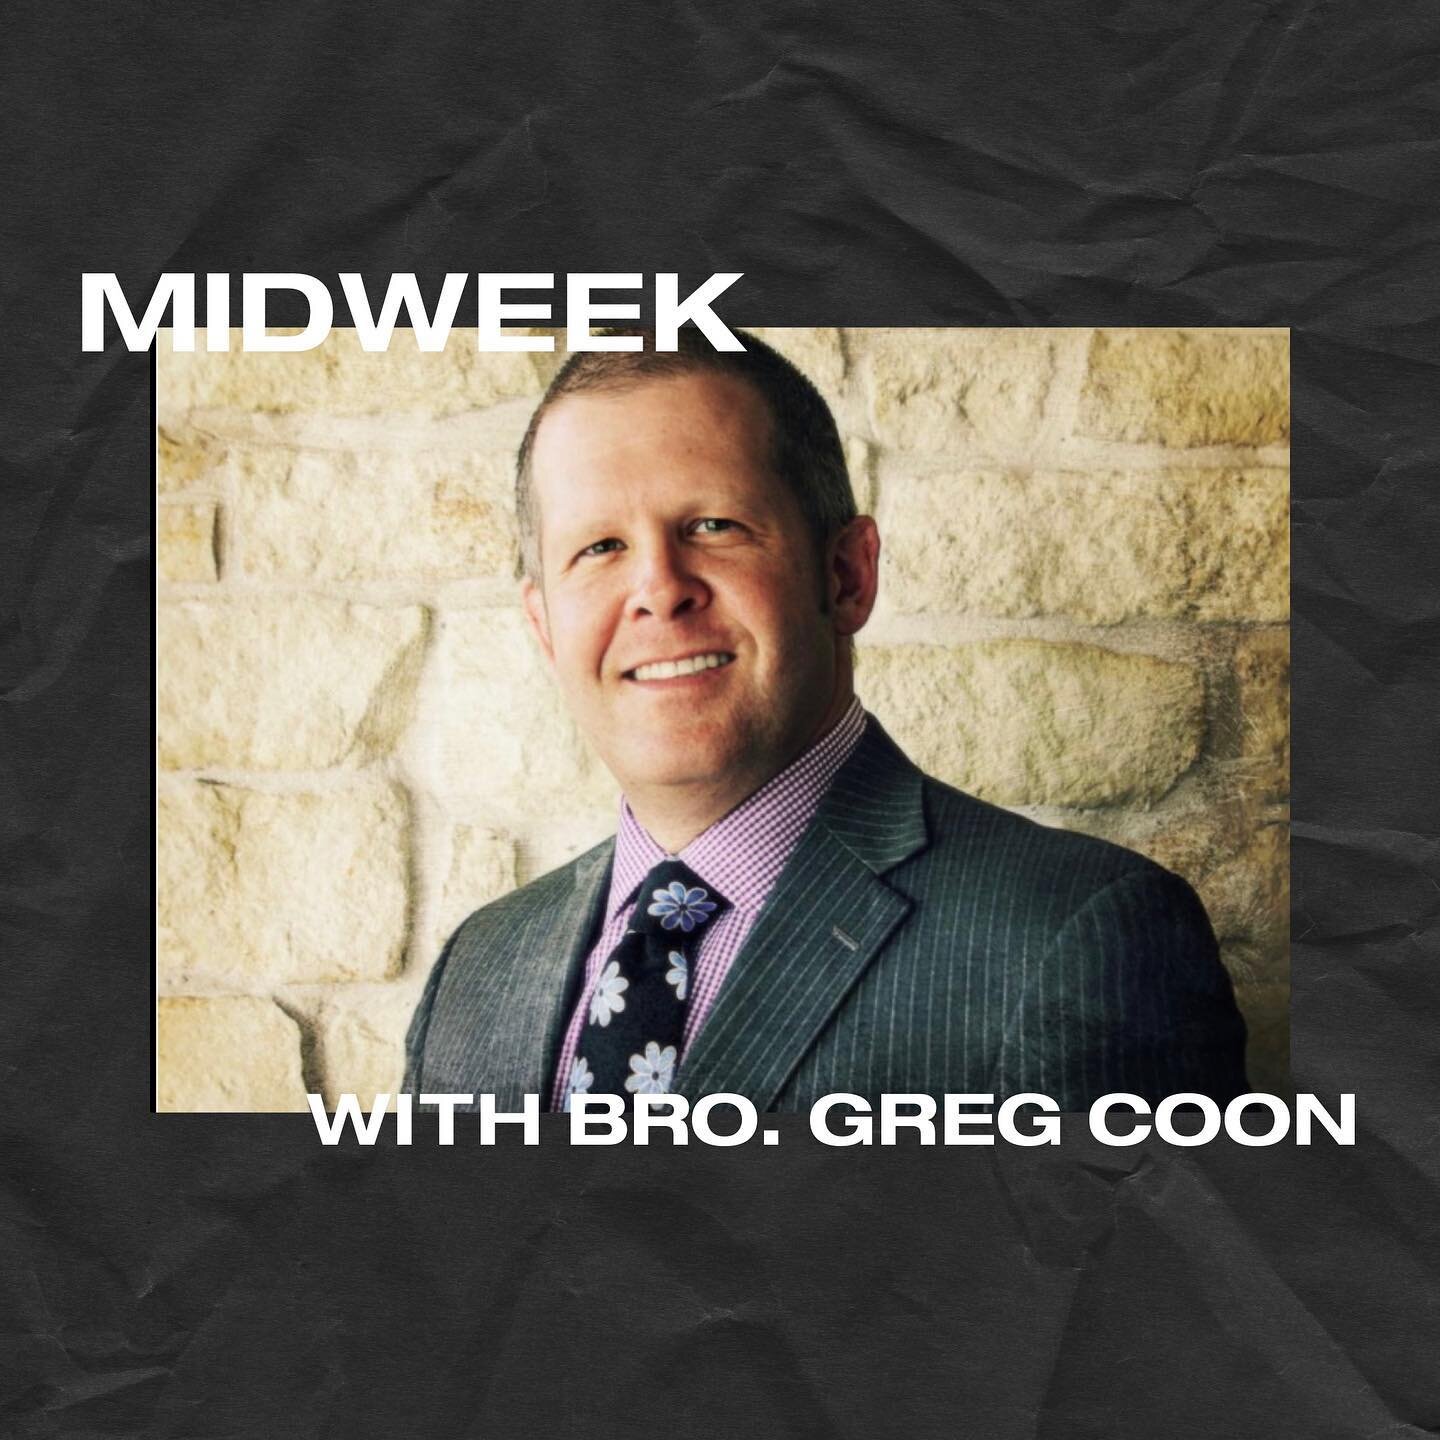 It&rsquo;s Wednesday and we hope to see you at church tonight! Bro. Greg Coon will be ministering to us so don&rsquo;t miss it! See you at 7pm! 😃